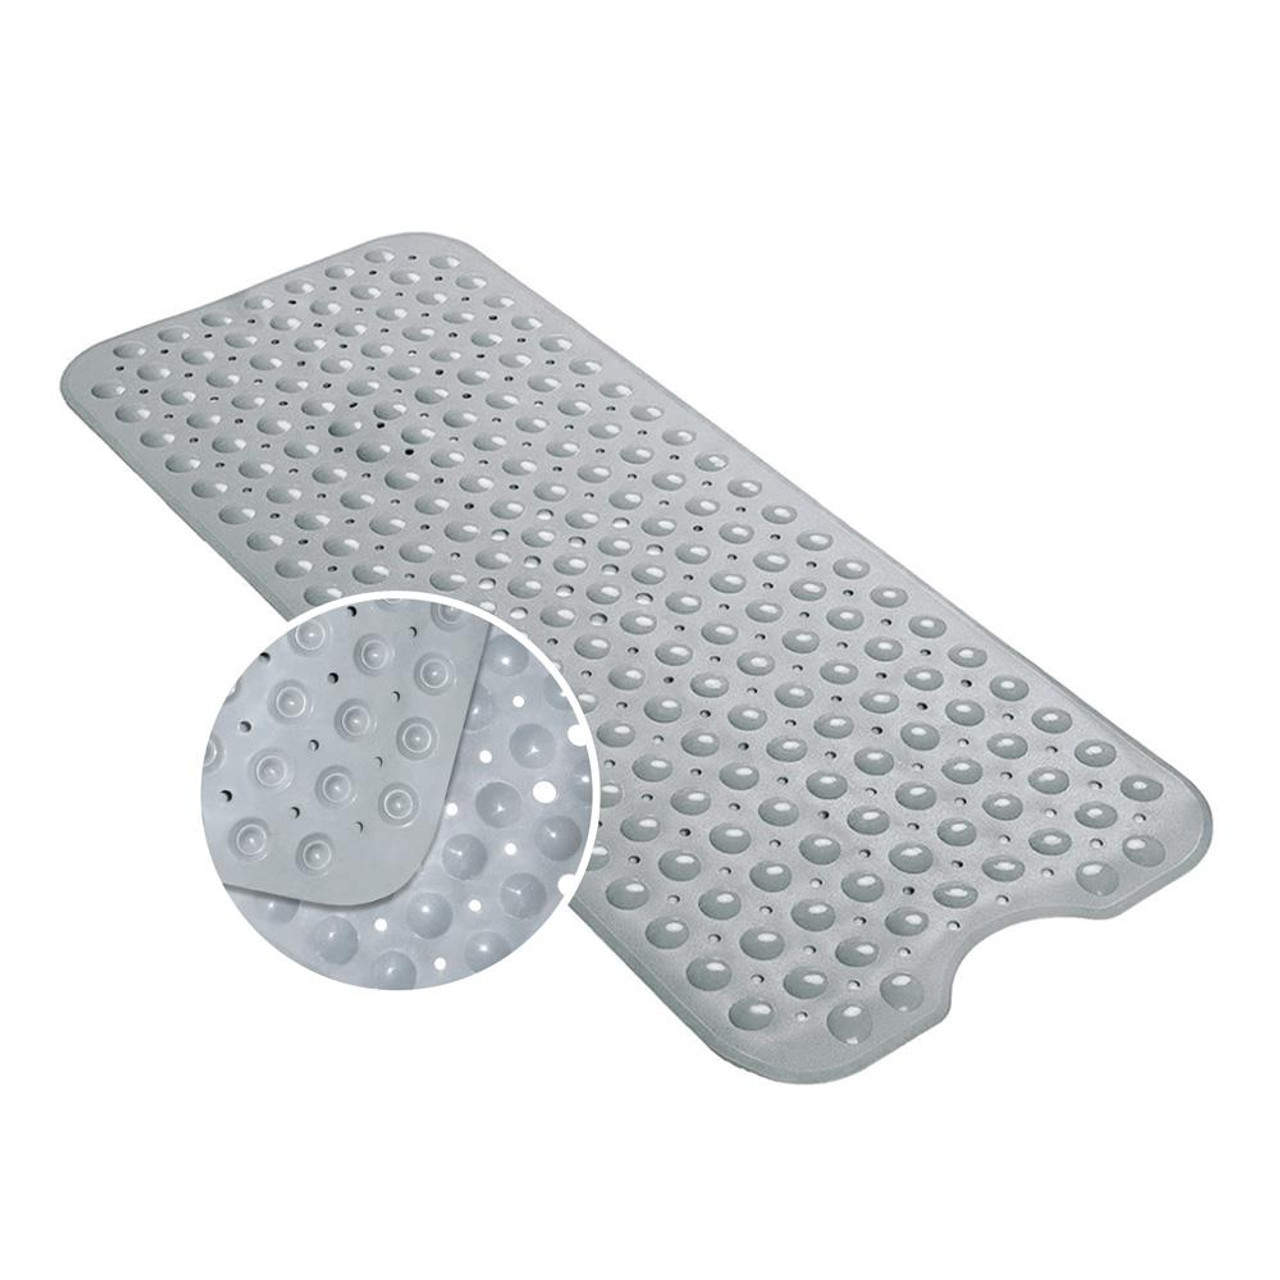 Bathtub Mats for Shower Tub Extra Long Non Slip Bath Mat, 39 x 16 Inch  Shower Mat with Drain Holes and Suction Cups, Bath Tub Mat for Bathroom  with